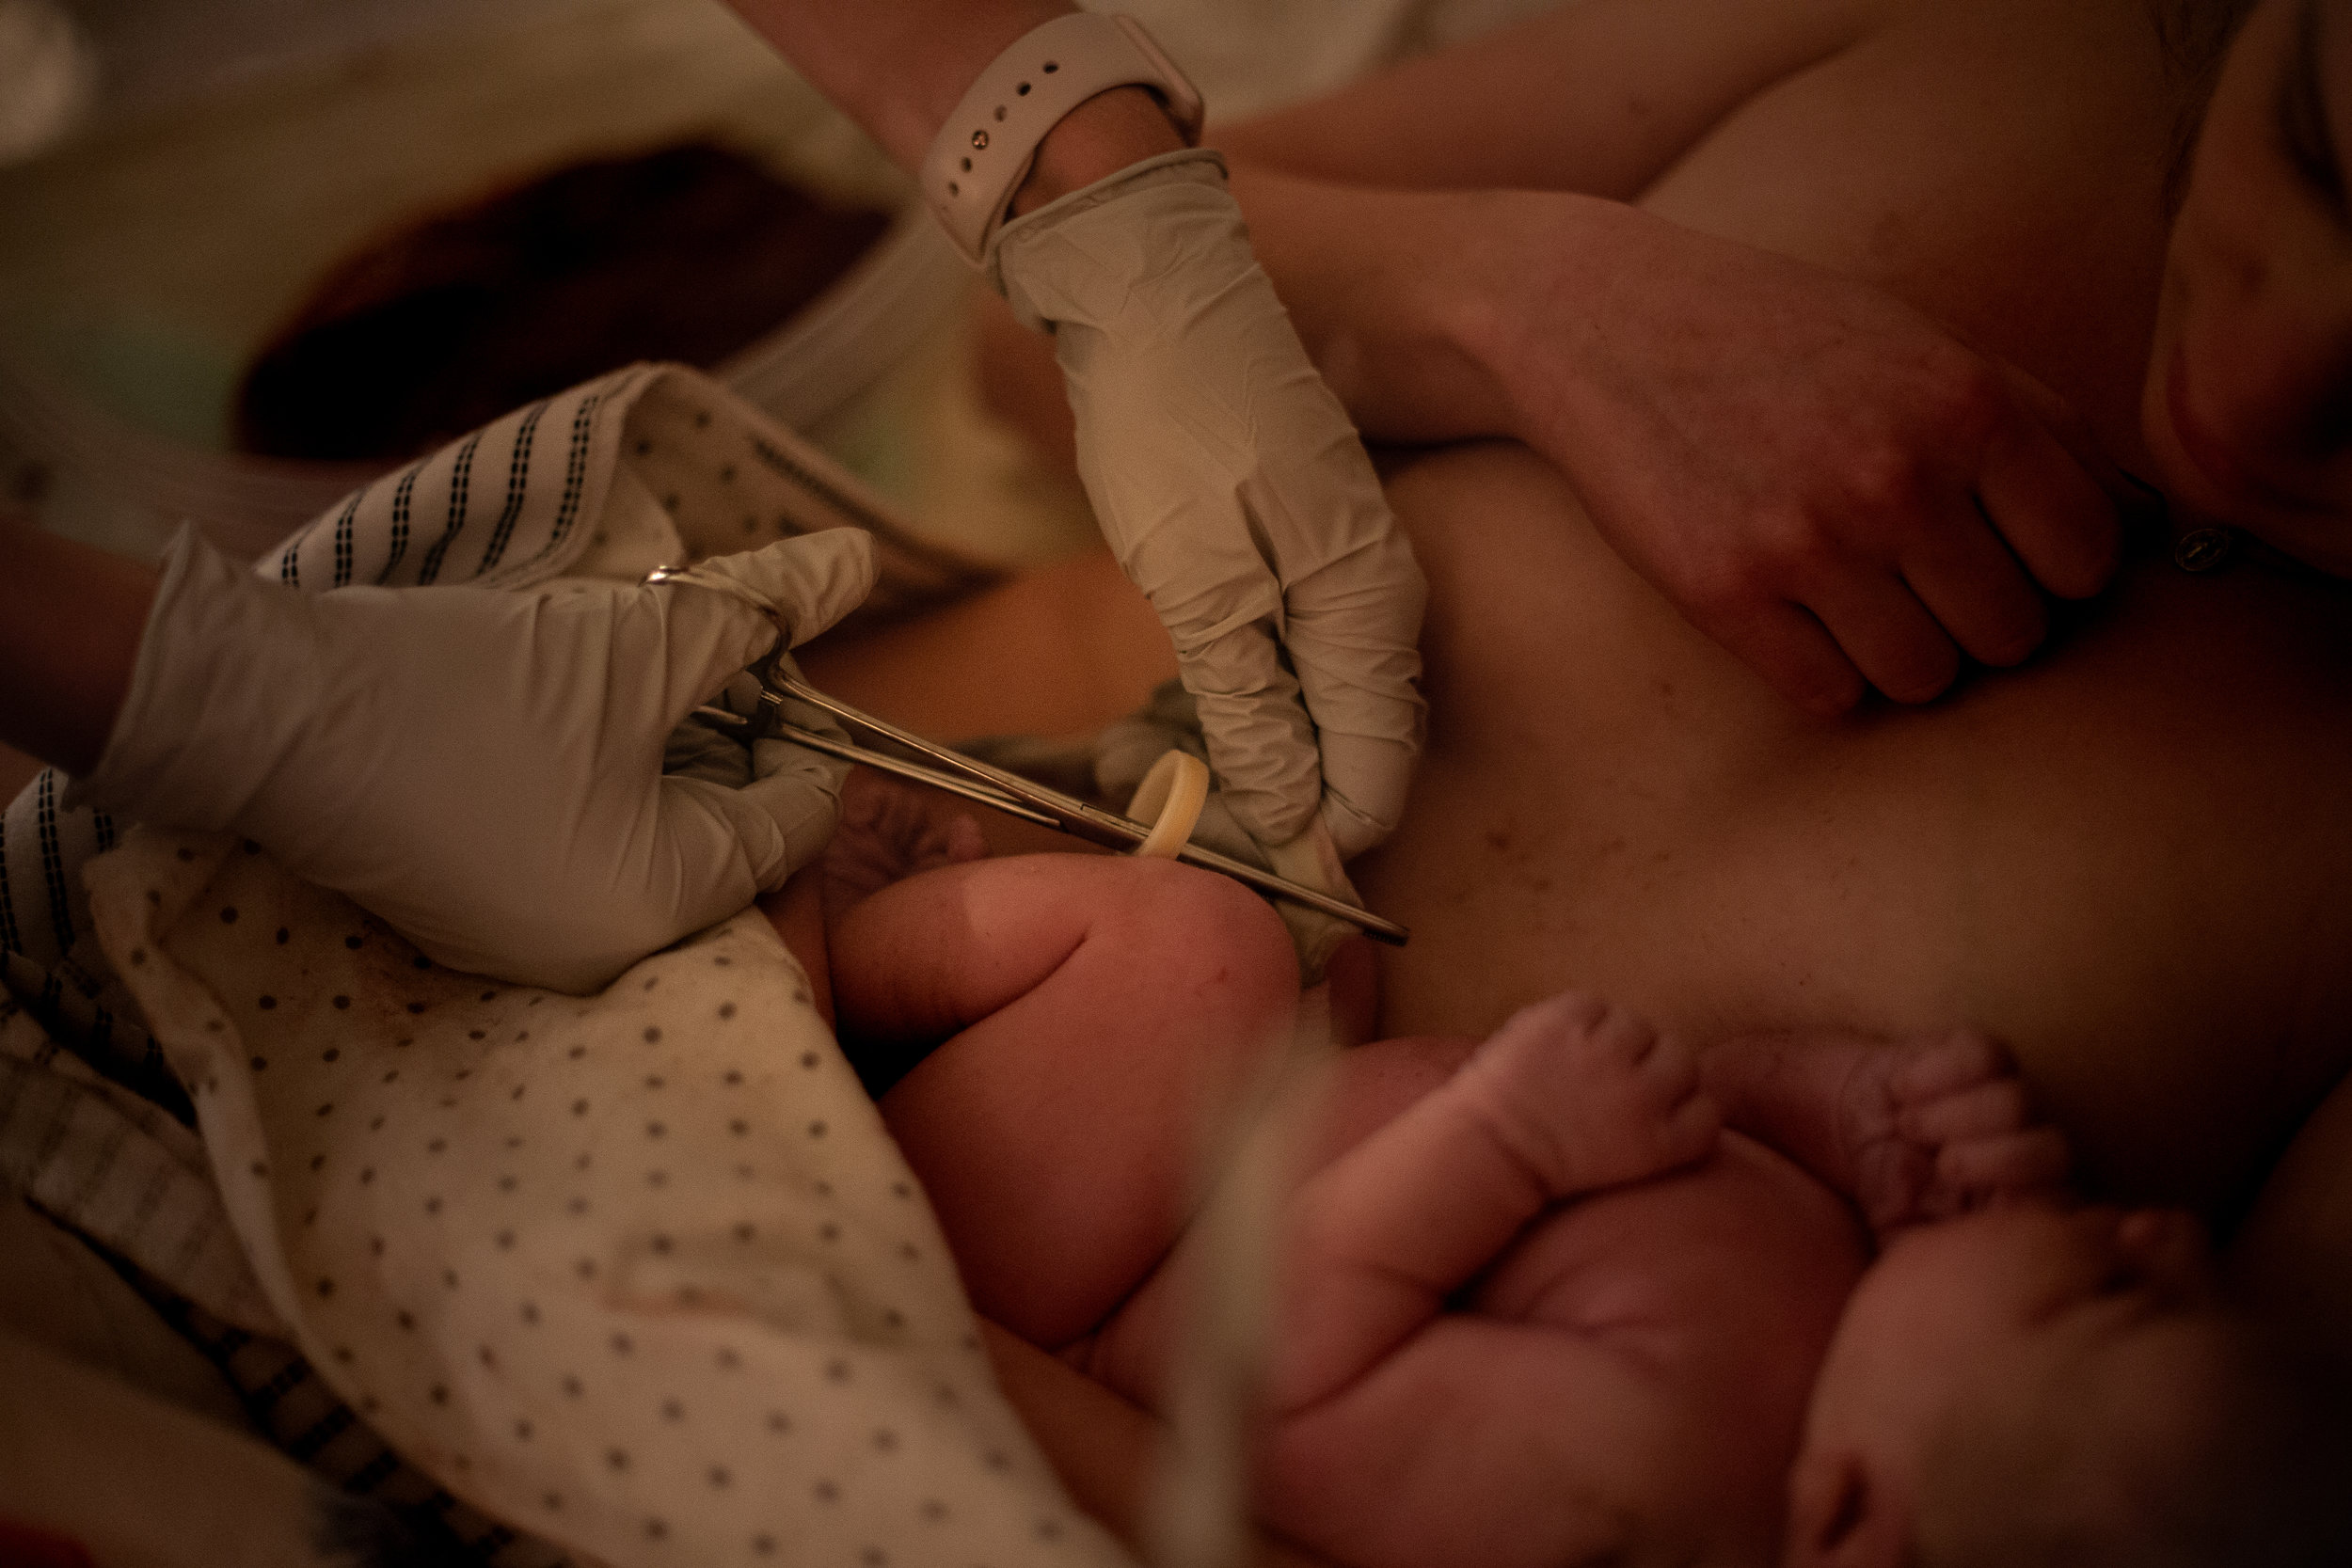 Home birth midwife cutting an umbilical cord. 